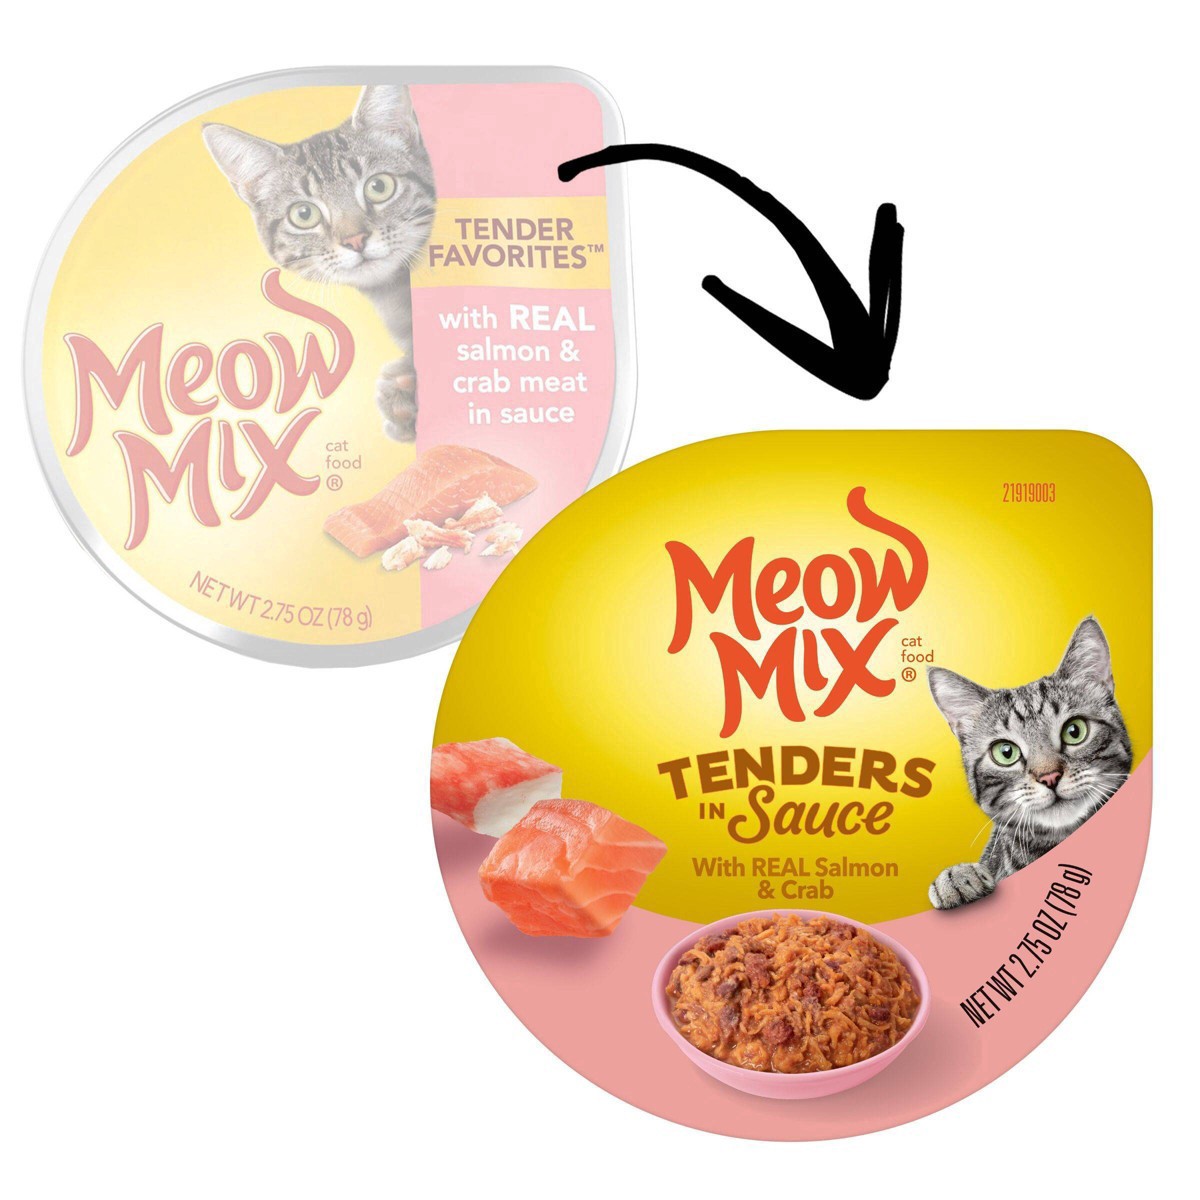 slide 2 of 64, Meow Mix Tenders in Sauce Wet Cat Food With REAL Salmon & Crab, 2.75 Oz. Cup (Packaging And Formulation Updates Underway), 2.75 oz